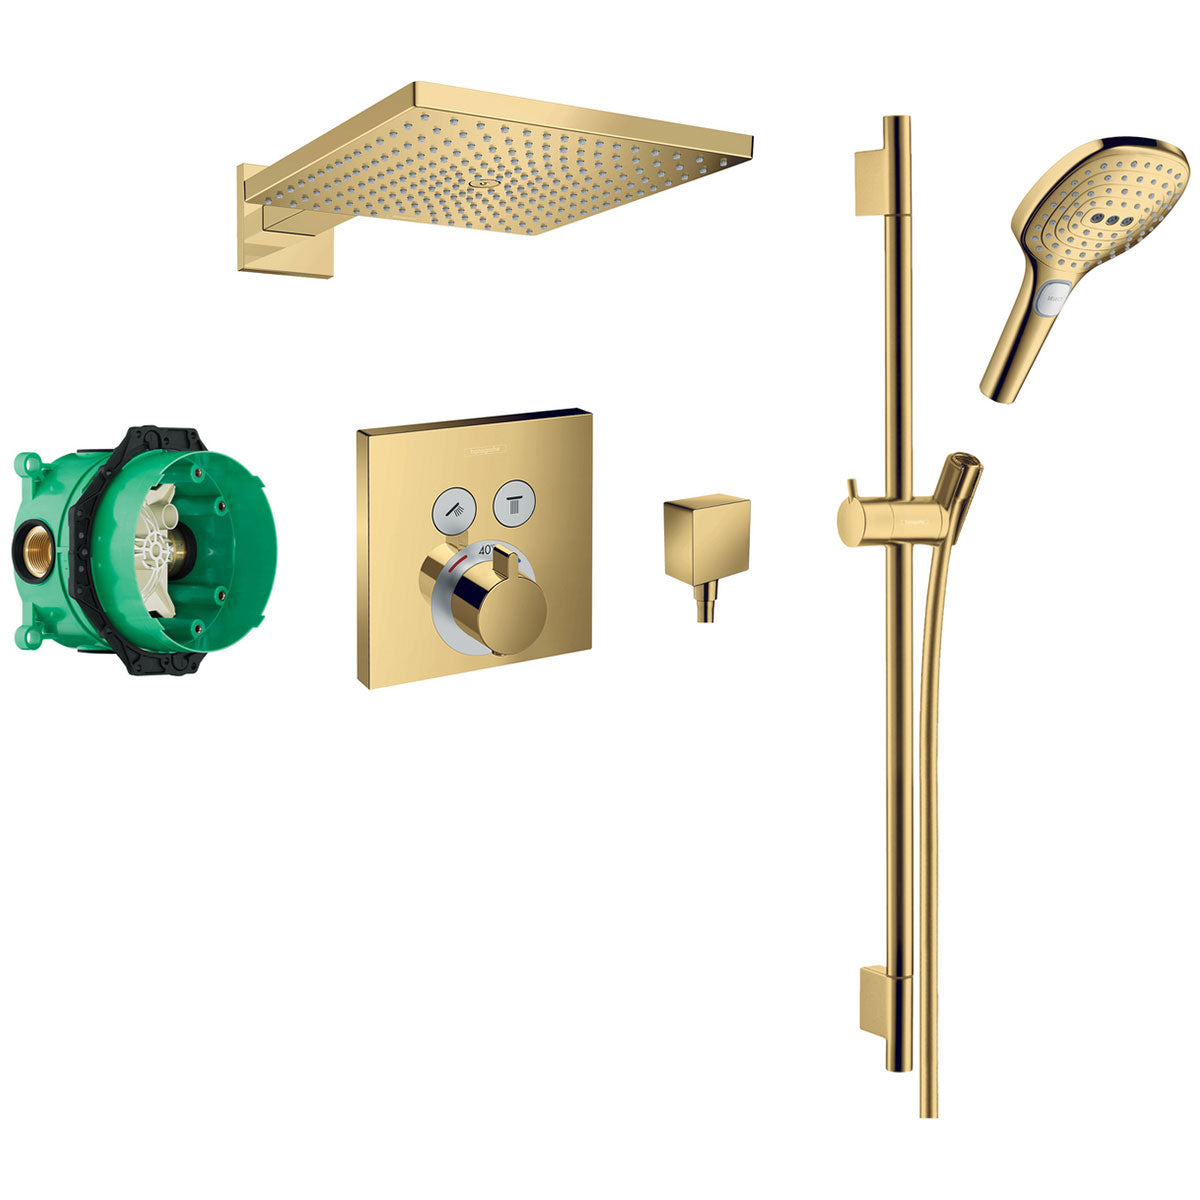 Hansgrohe Square 2 Outlet Push Thermostatic Shower Valve with Raindance 300 Overhead and Slide Rail Handset - Polished Gold